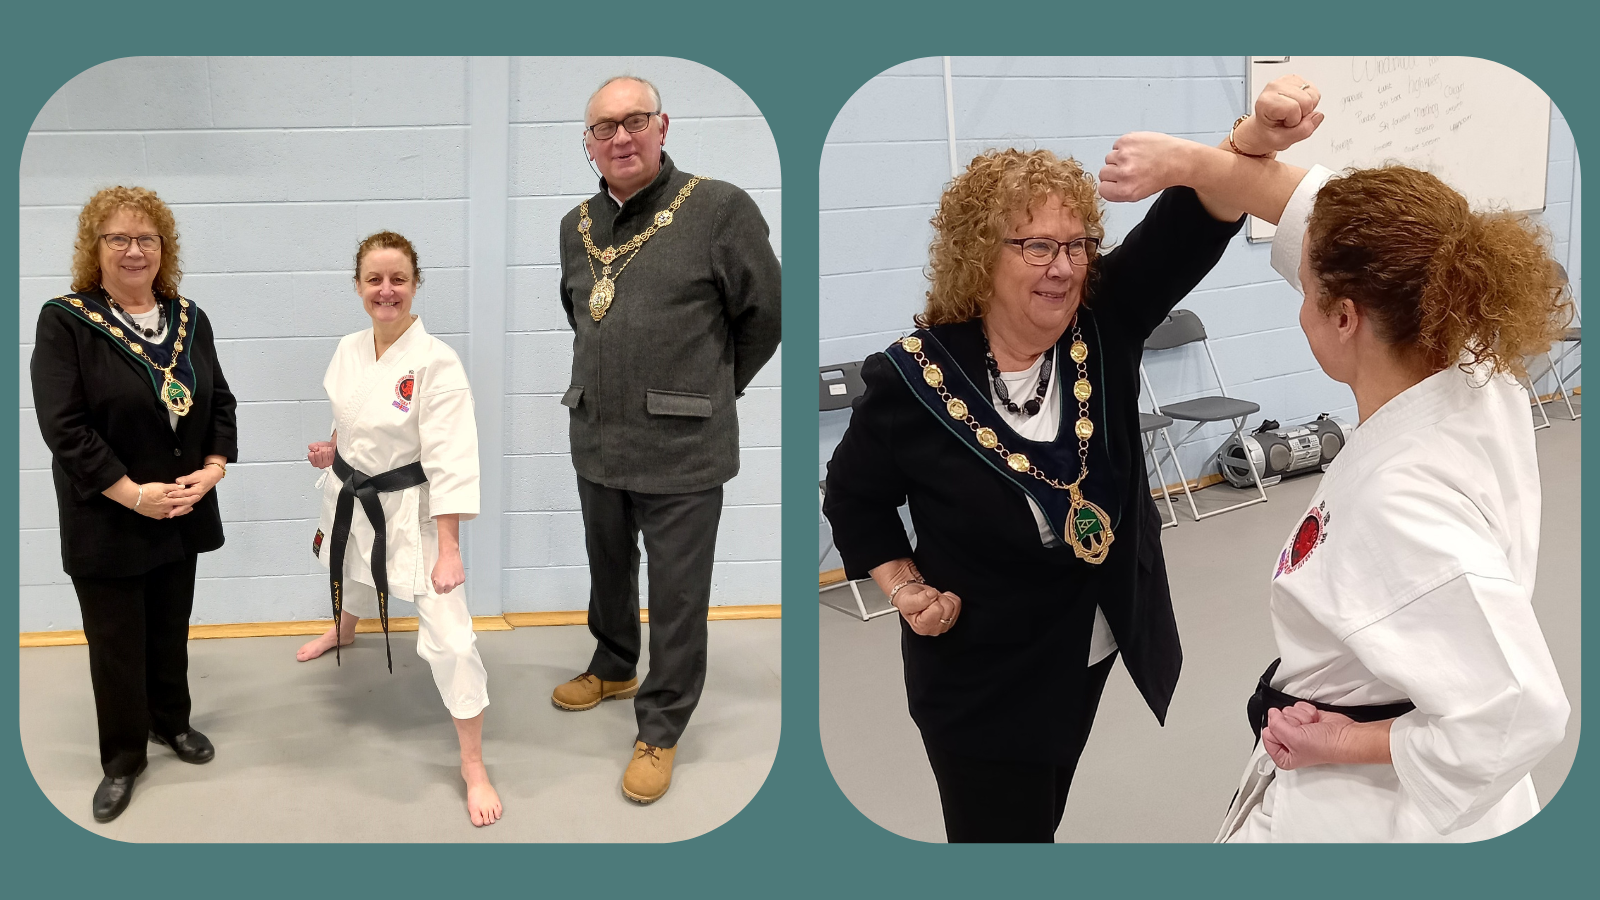 Chairman welcomes new Karate Club to the District